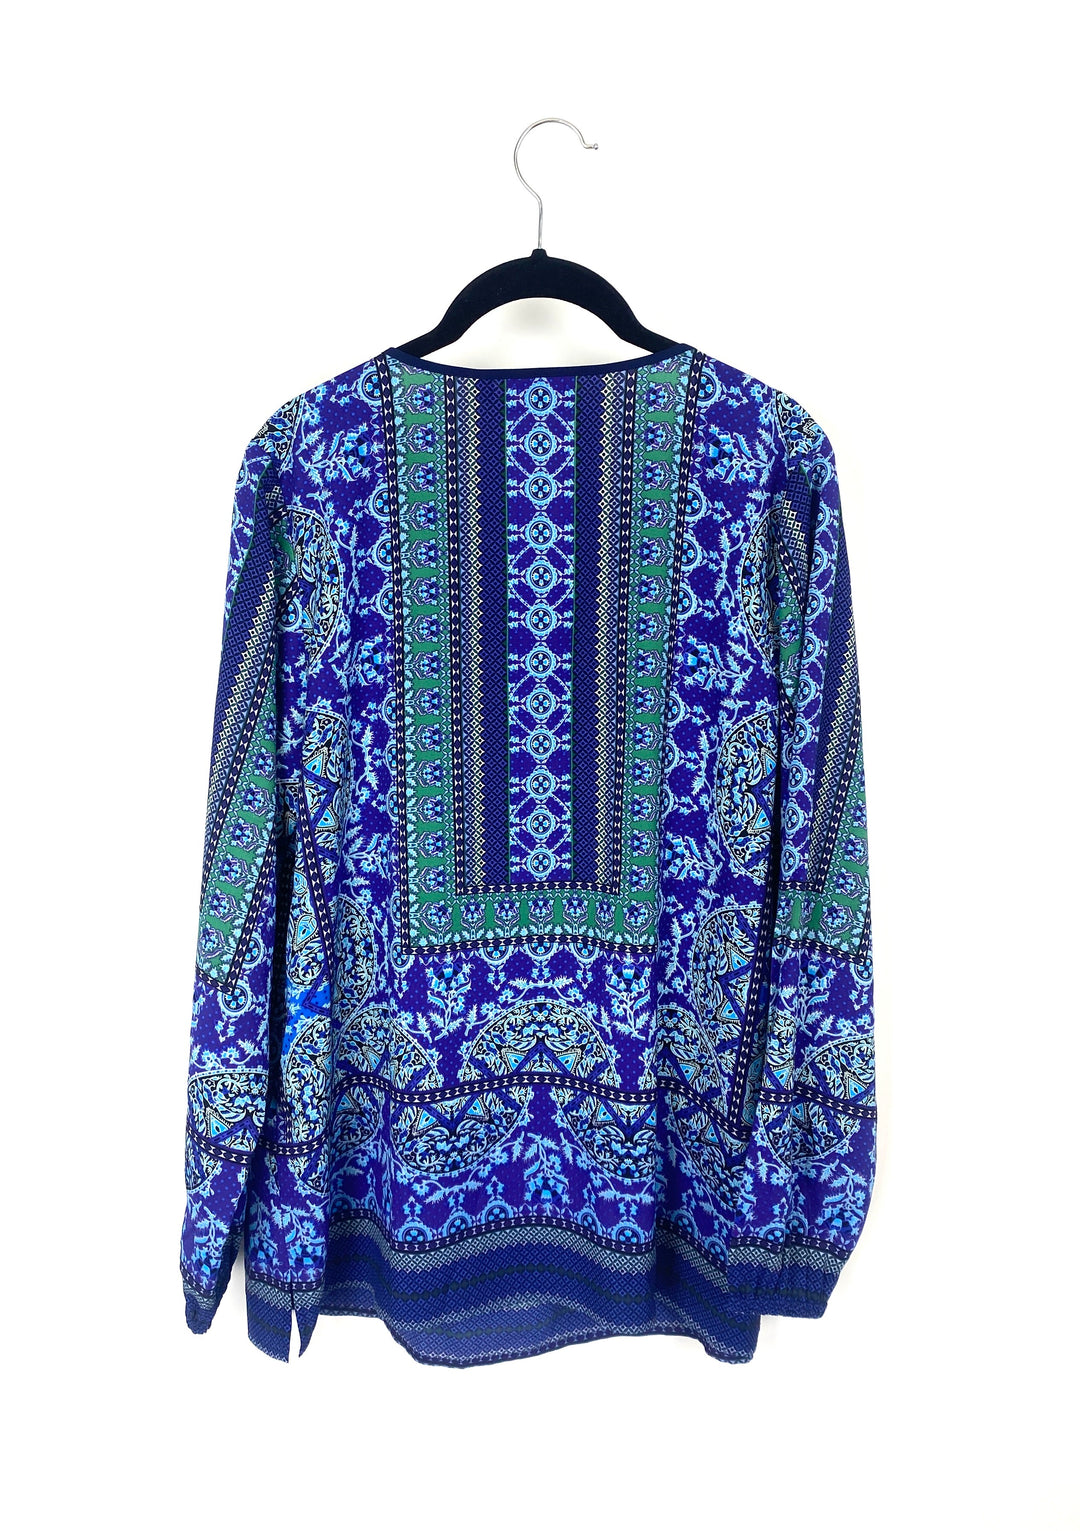 Purple, Green and Blue Abstract Printed Long Sleeve Top - Medium/Large